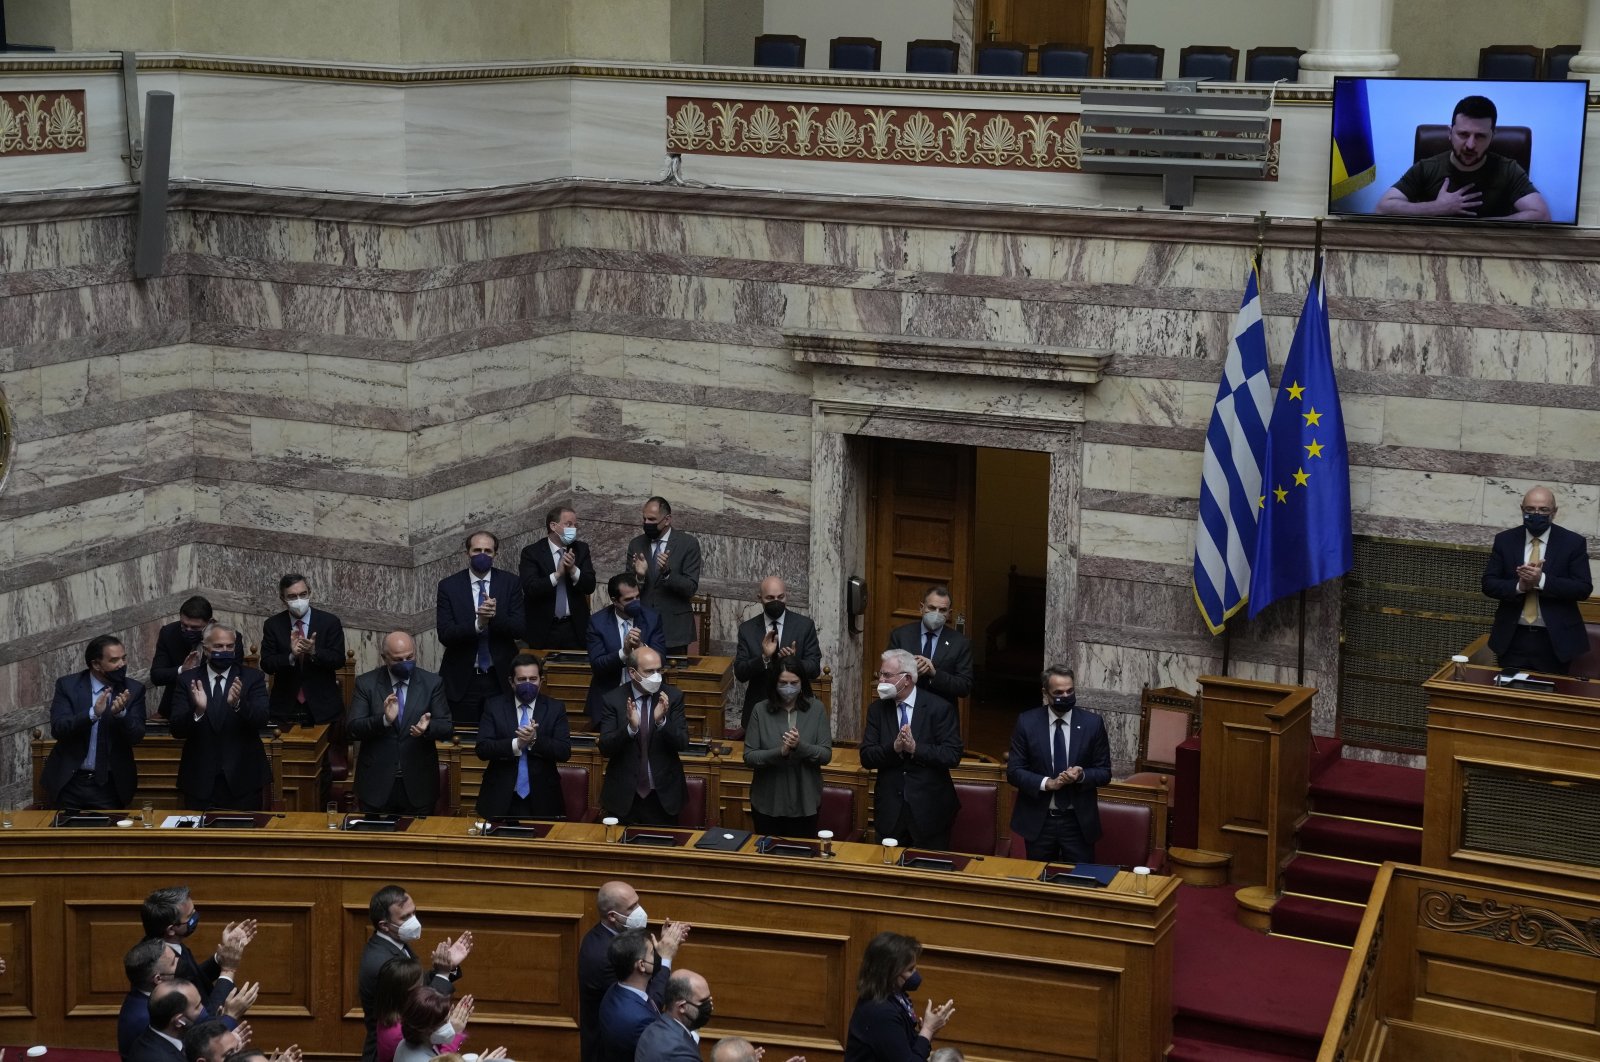 Greek Cabinet and lawmakers applaud as Ukrainian President Volodymyr Zelenskyy (on screen) after addressing the Greek Parliament. Zelenskyy called for more weapons to be sent from the West to Ukraine, and for tightened sanctions on Russia, Athens, Greece, April 7, 2022. (AP Photo)